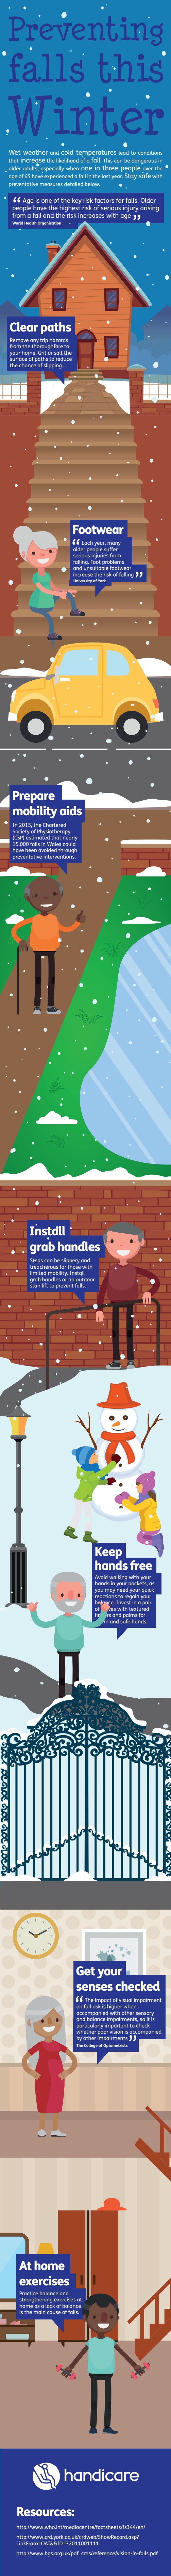 Preventing falls this winter